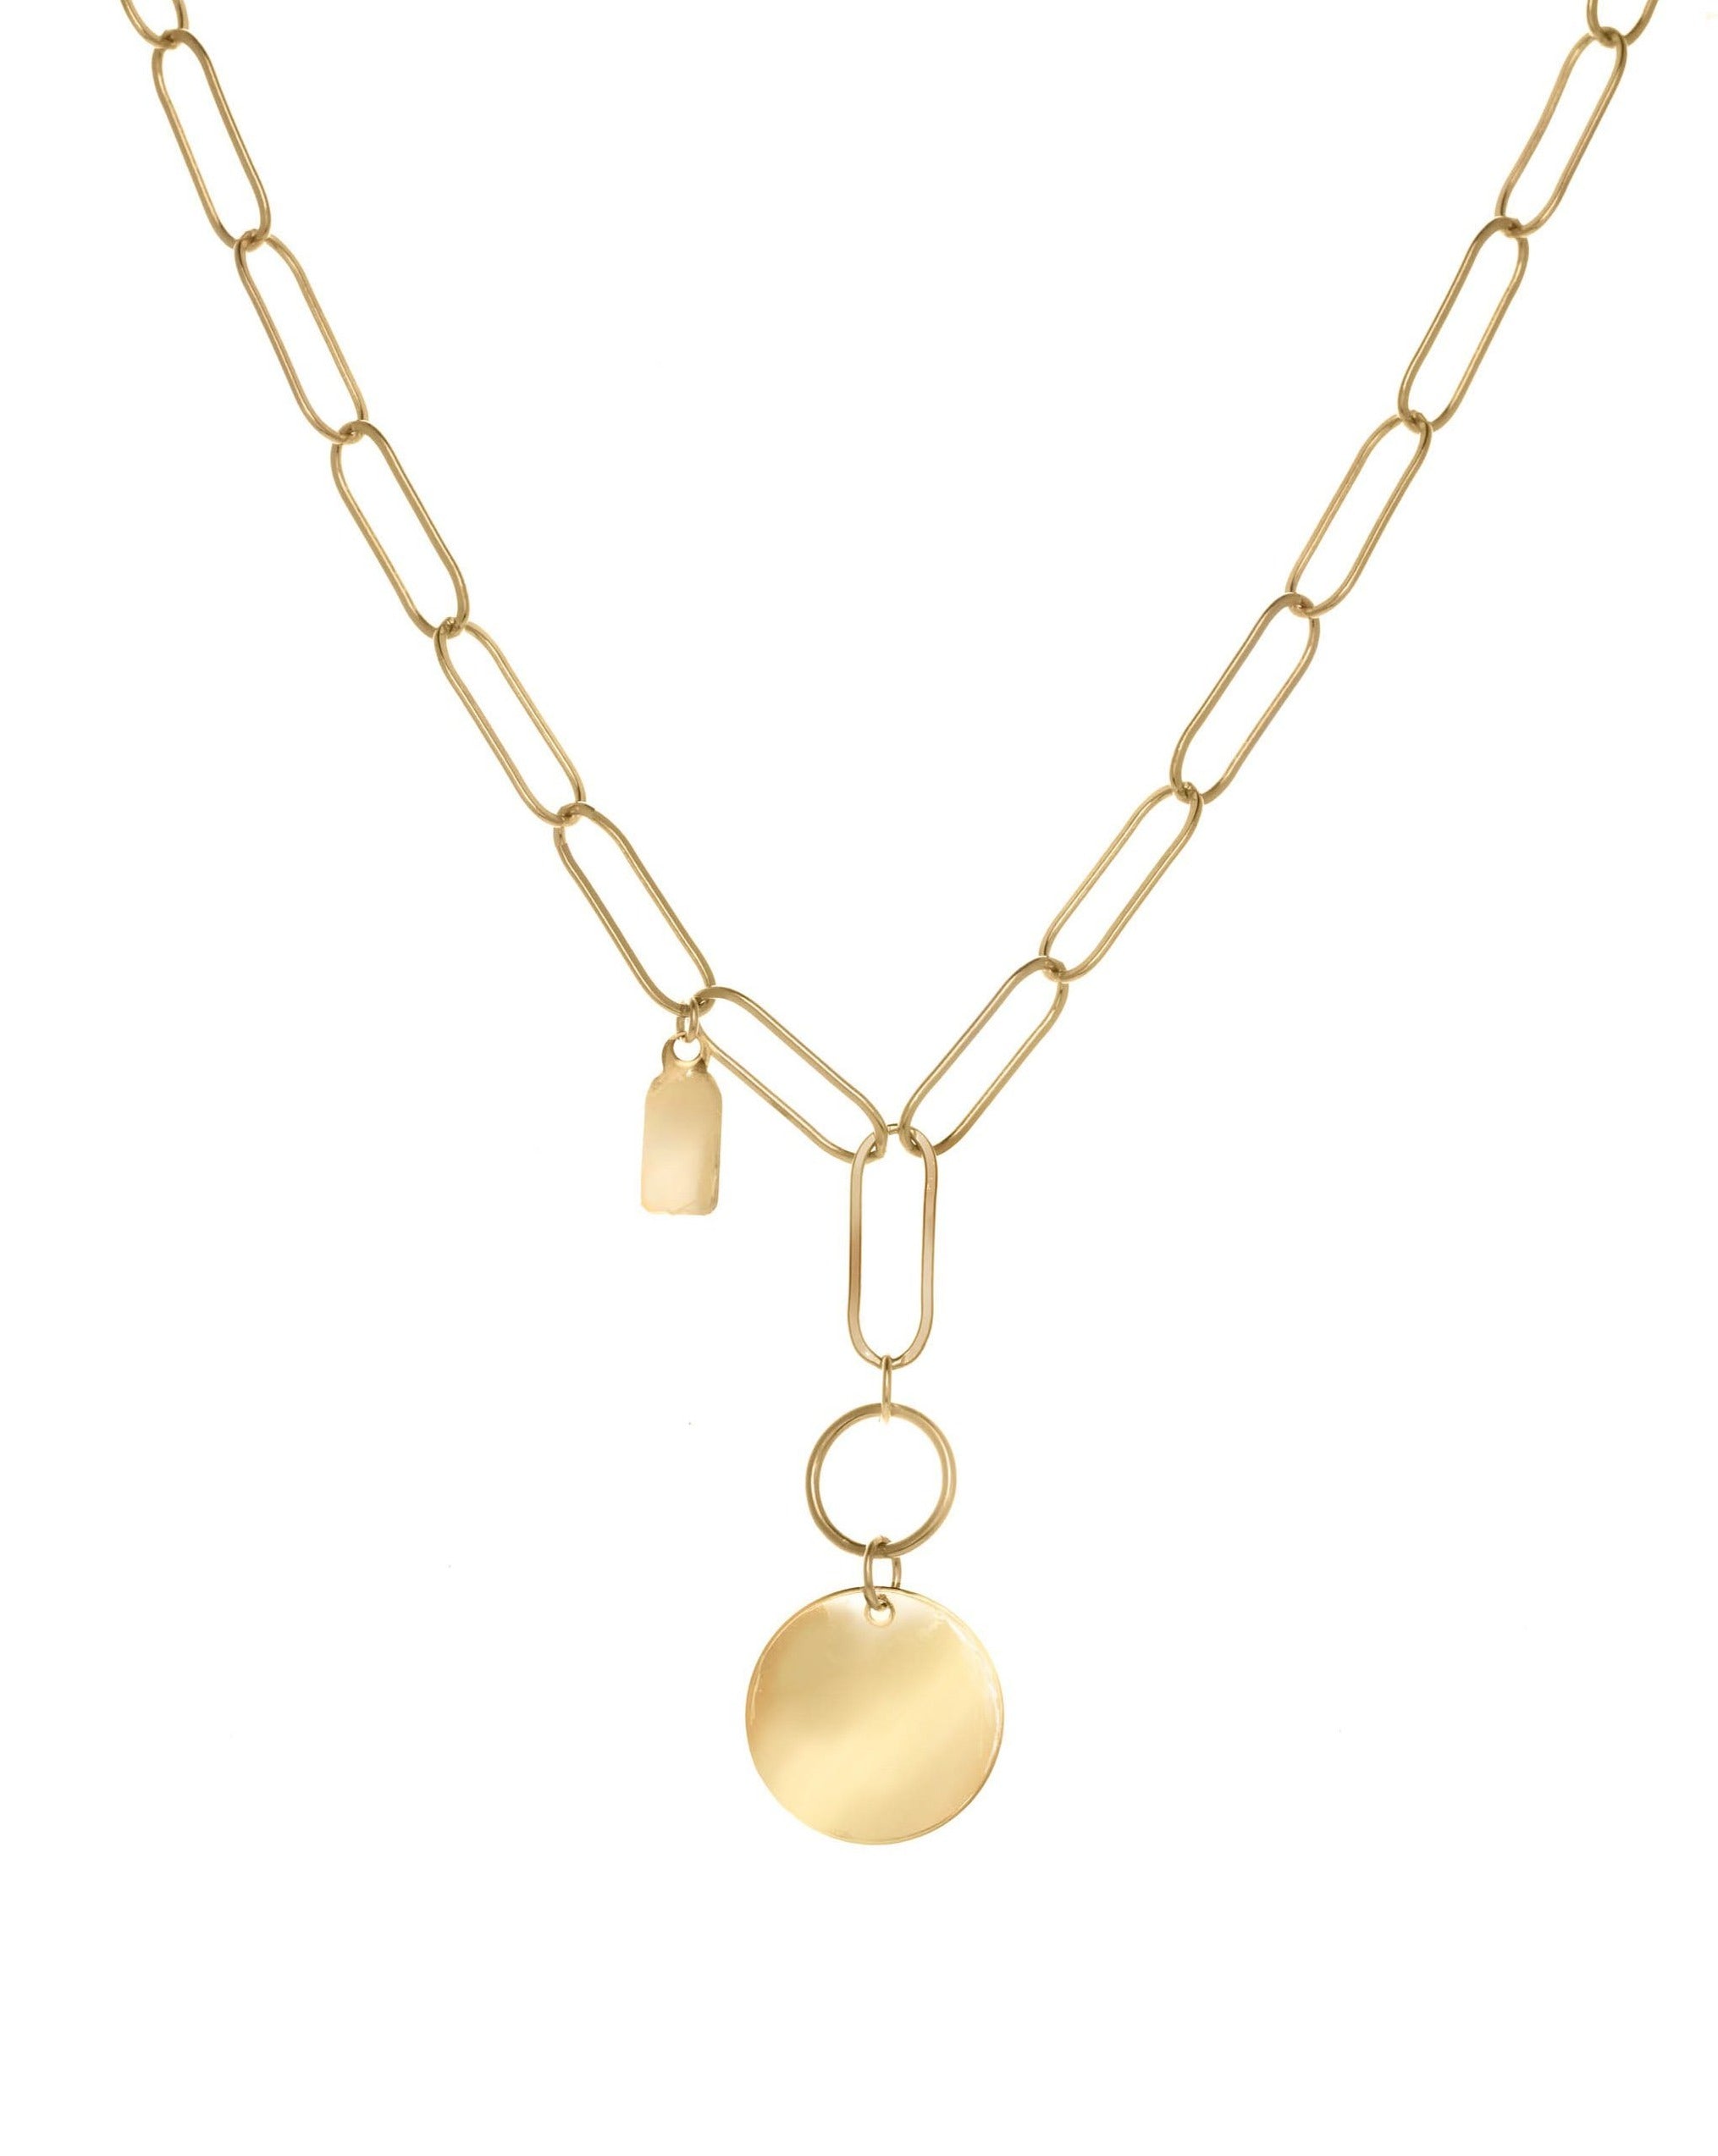 Scarlett Necklace by KOZAKH. A 16 to 18 inch adjustable length, flat oval chain necklace, crafted in 14K Gold Filled, featuring a 3x5mm Tag and a 16mm Flat coin.